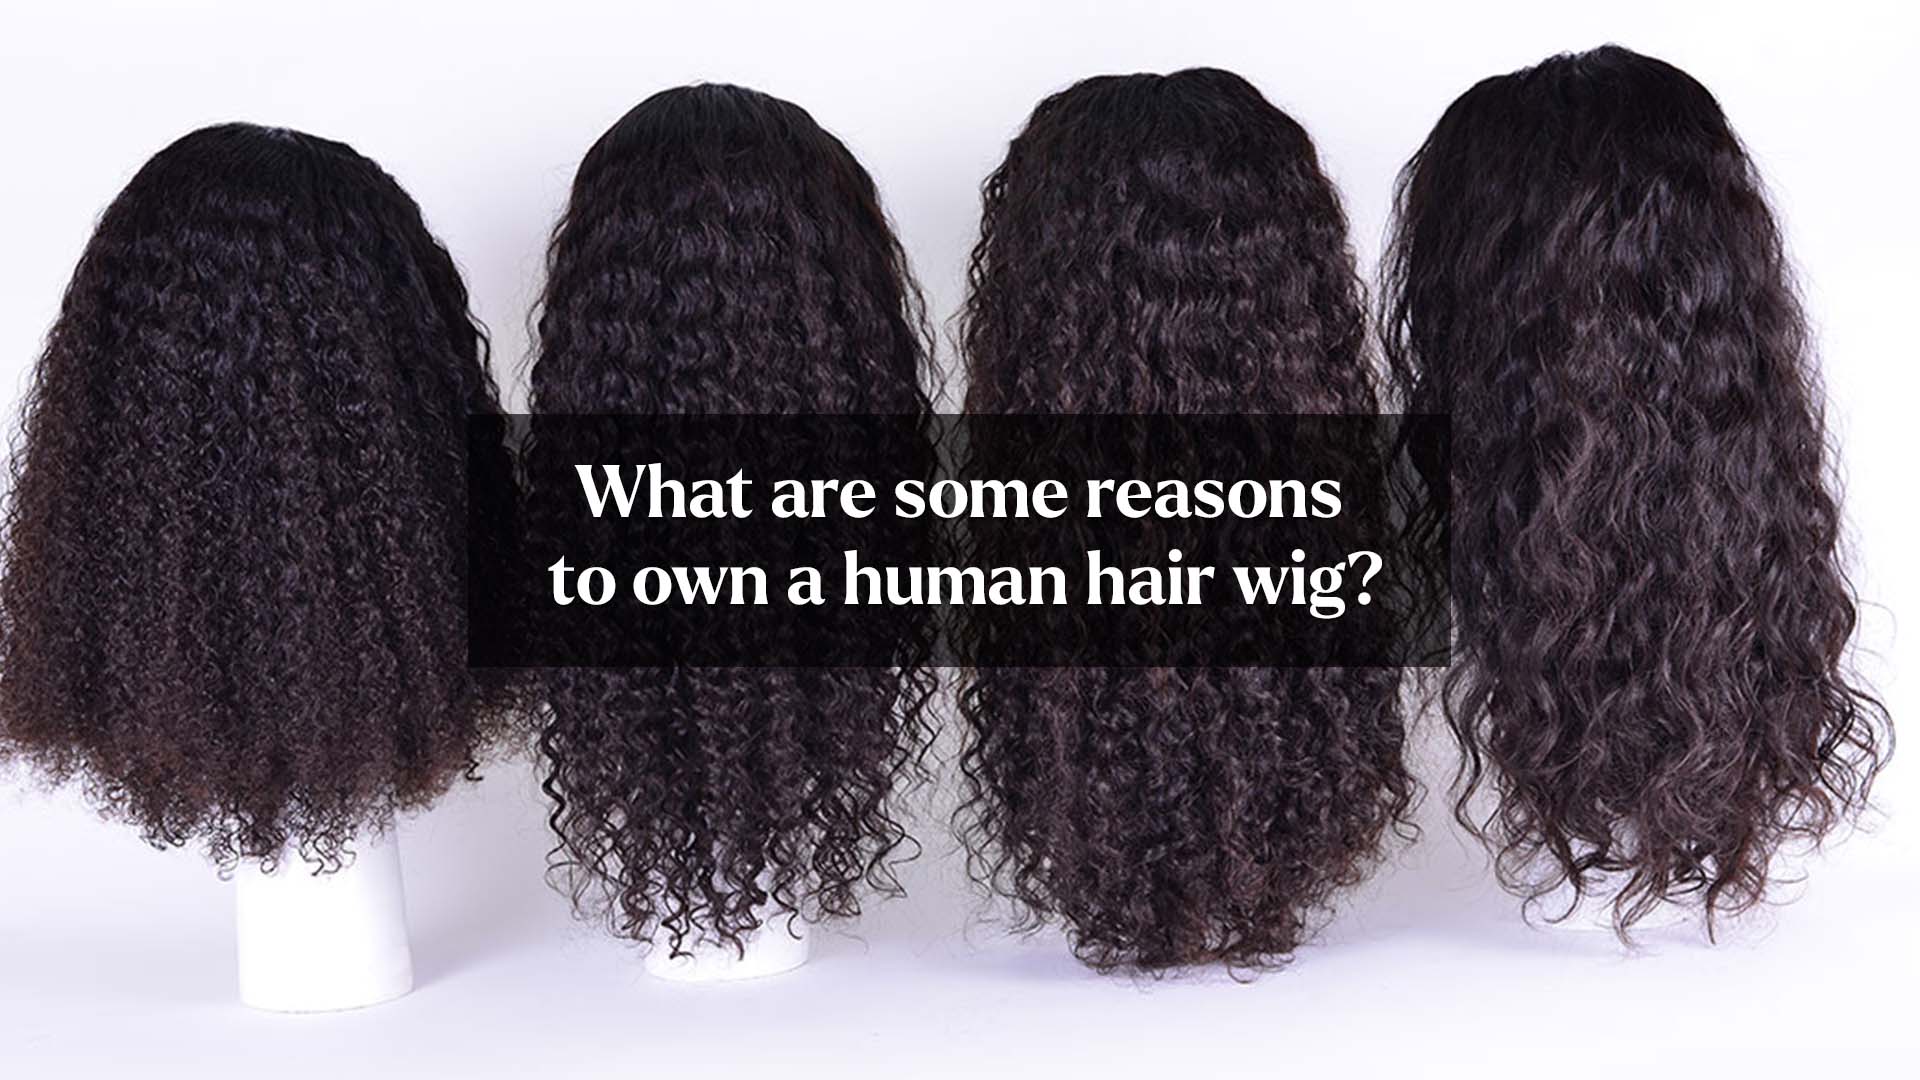 What are some reasons to own a human hair wig?